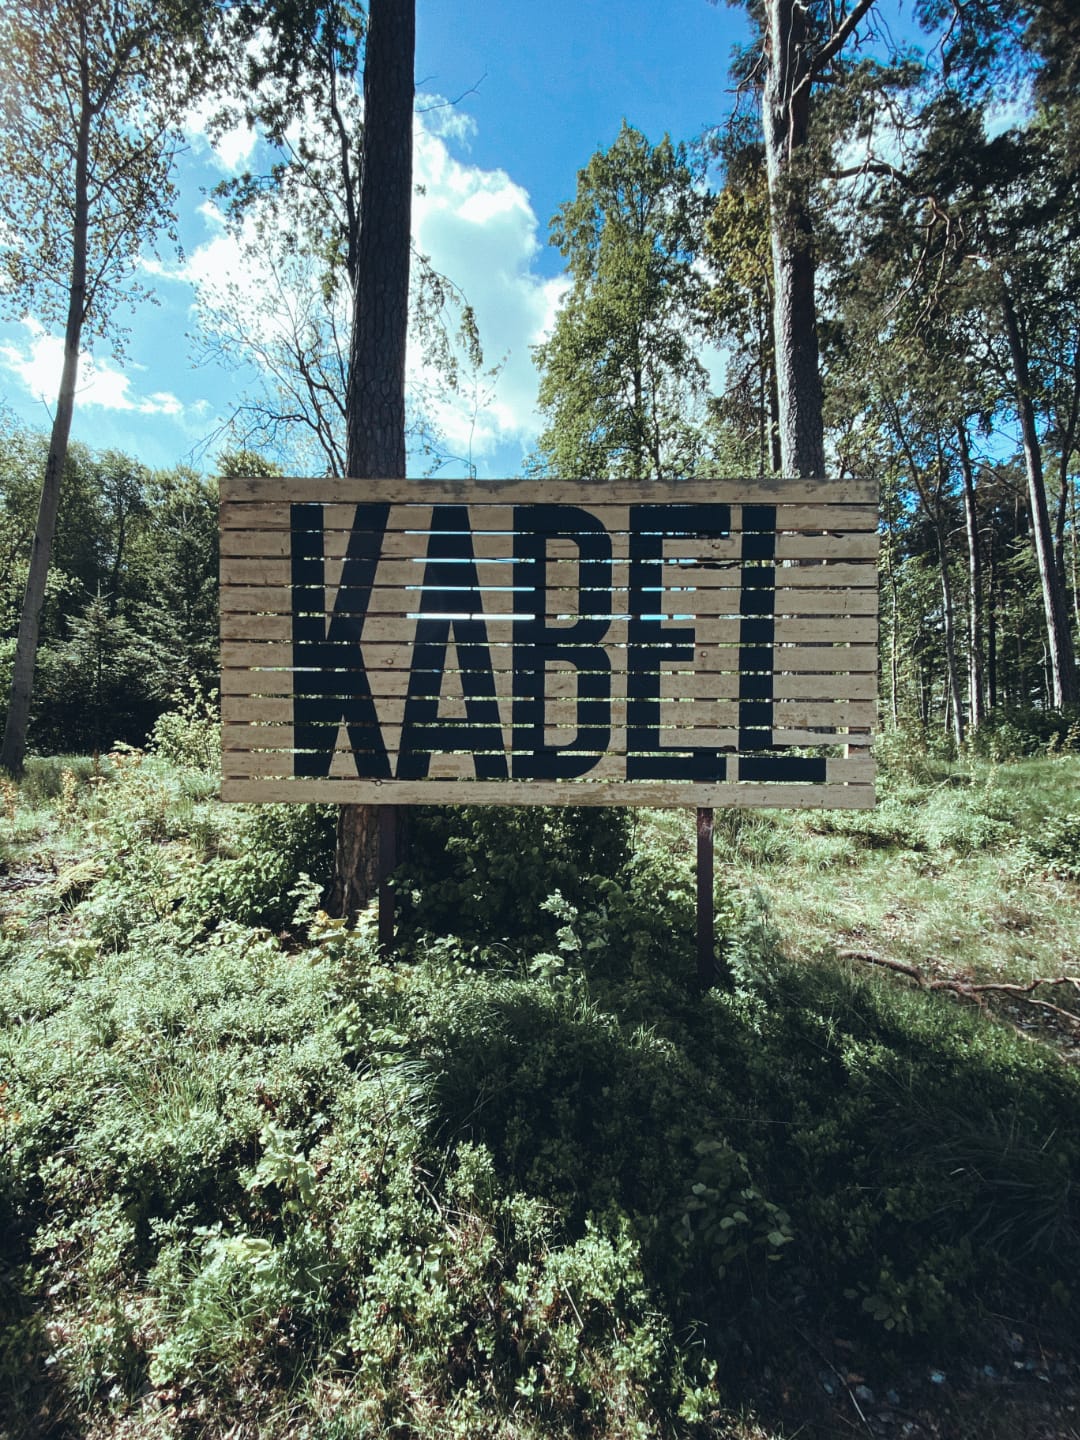 There is a big wooden sign surrounded by trees and greenness, seemingly in the middle of the forest. The word KABEL is written using giant, black letters in all caps.